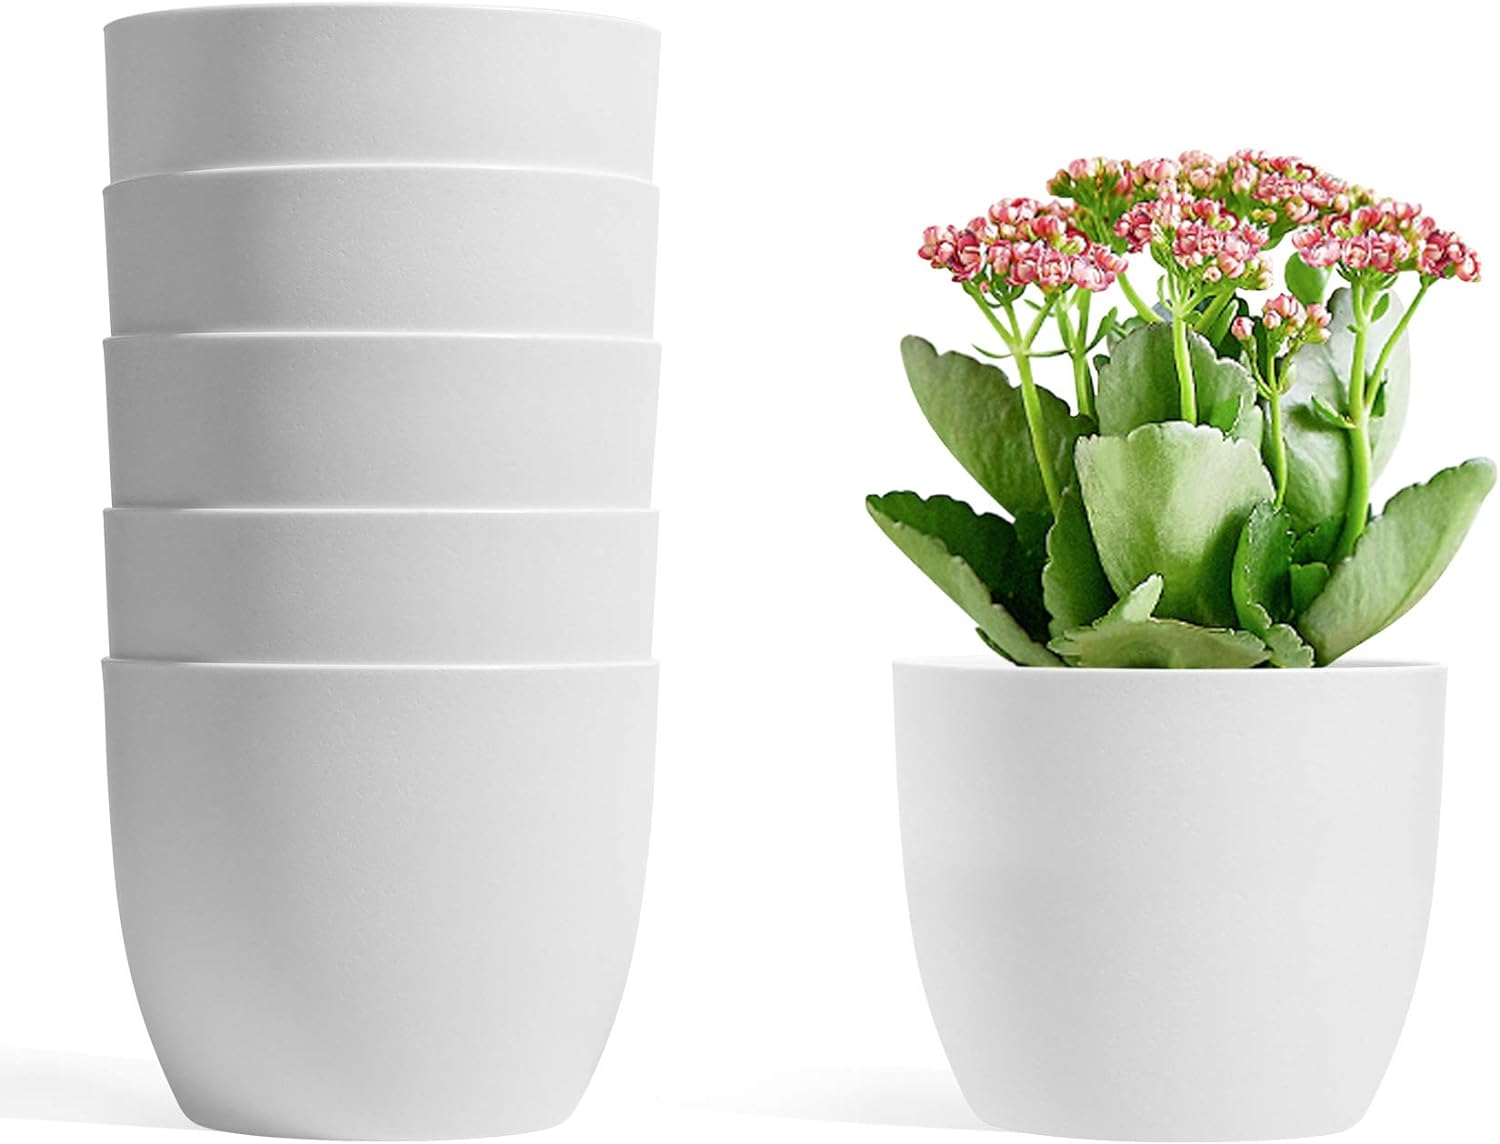 T4U 5 Inch Self Watering Planters Plastic Plant Pot, Modern Decorative Flower Pot/Window Box for All House Plants, Flowers, Herbs, African Violets, Succulents - White, Set of 6